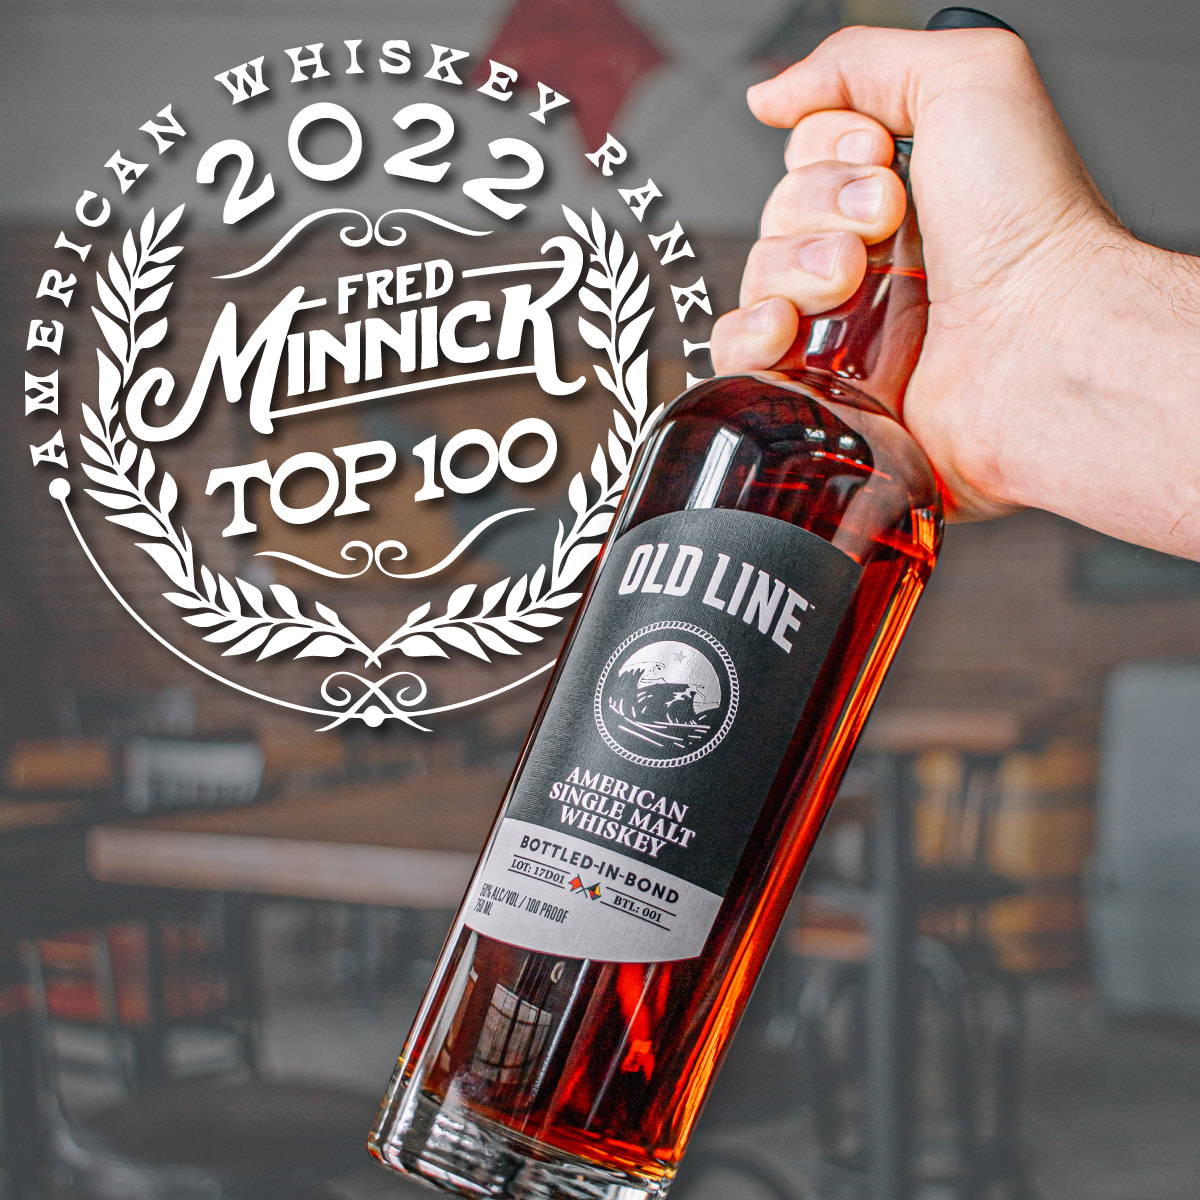 Old Line Bottled-in-Bond A top 100 American Whiskey